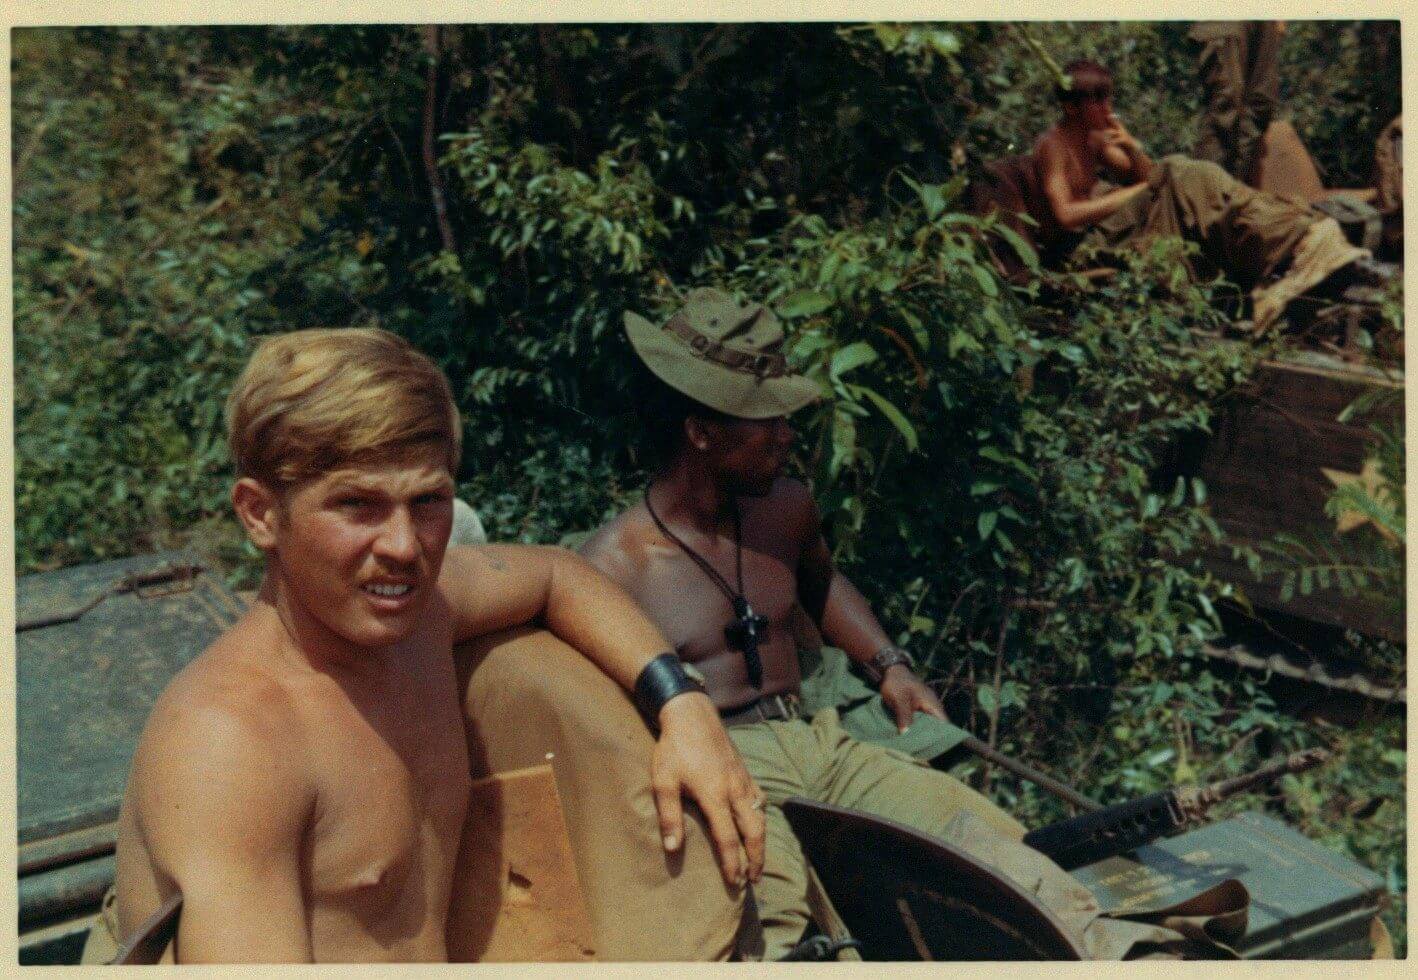 Young U.S. soldiers, shirtless in the jungle.